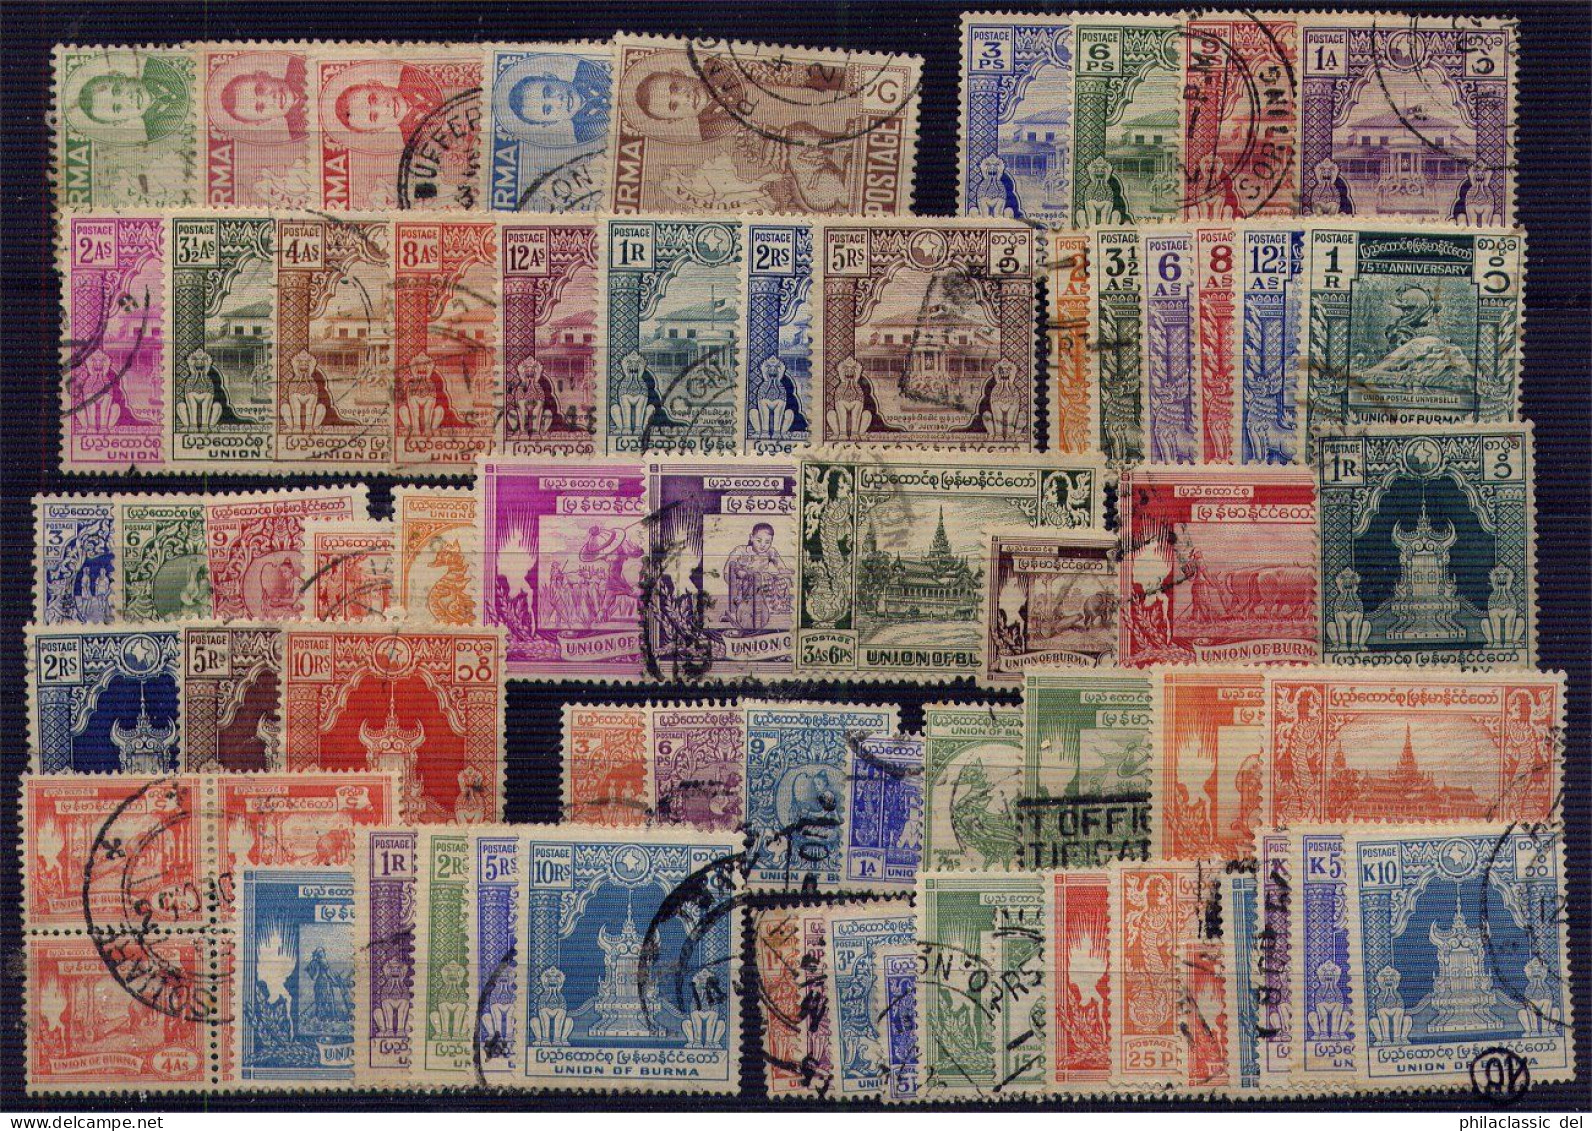 BURMA 1938 - 1954, Very Nice Nearly Complete Collection Fine Cancelled Cat Val 1150 Pounds - Birmanie (...-1947)